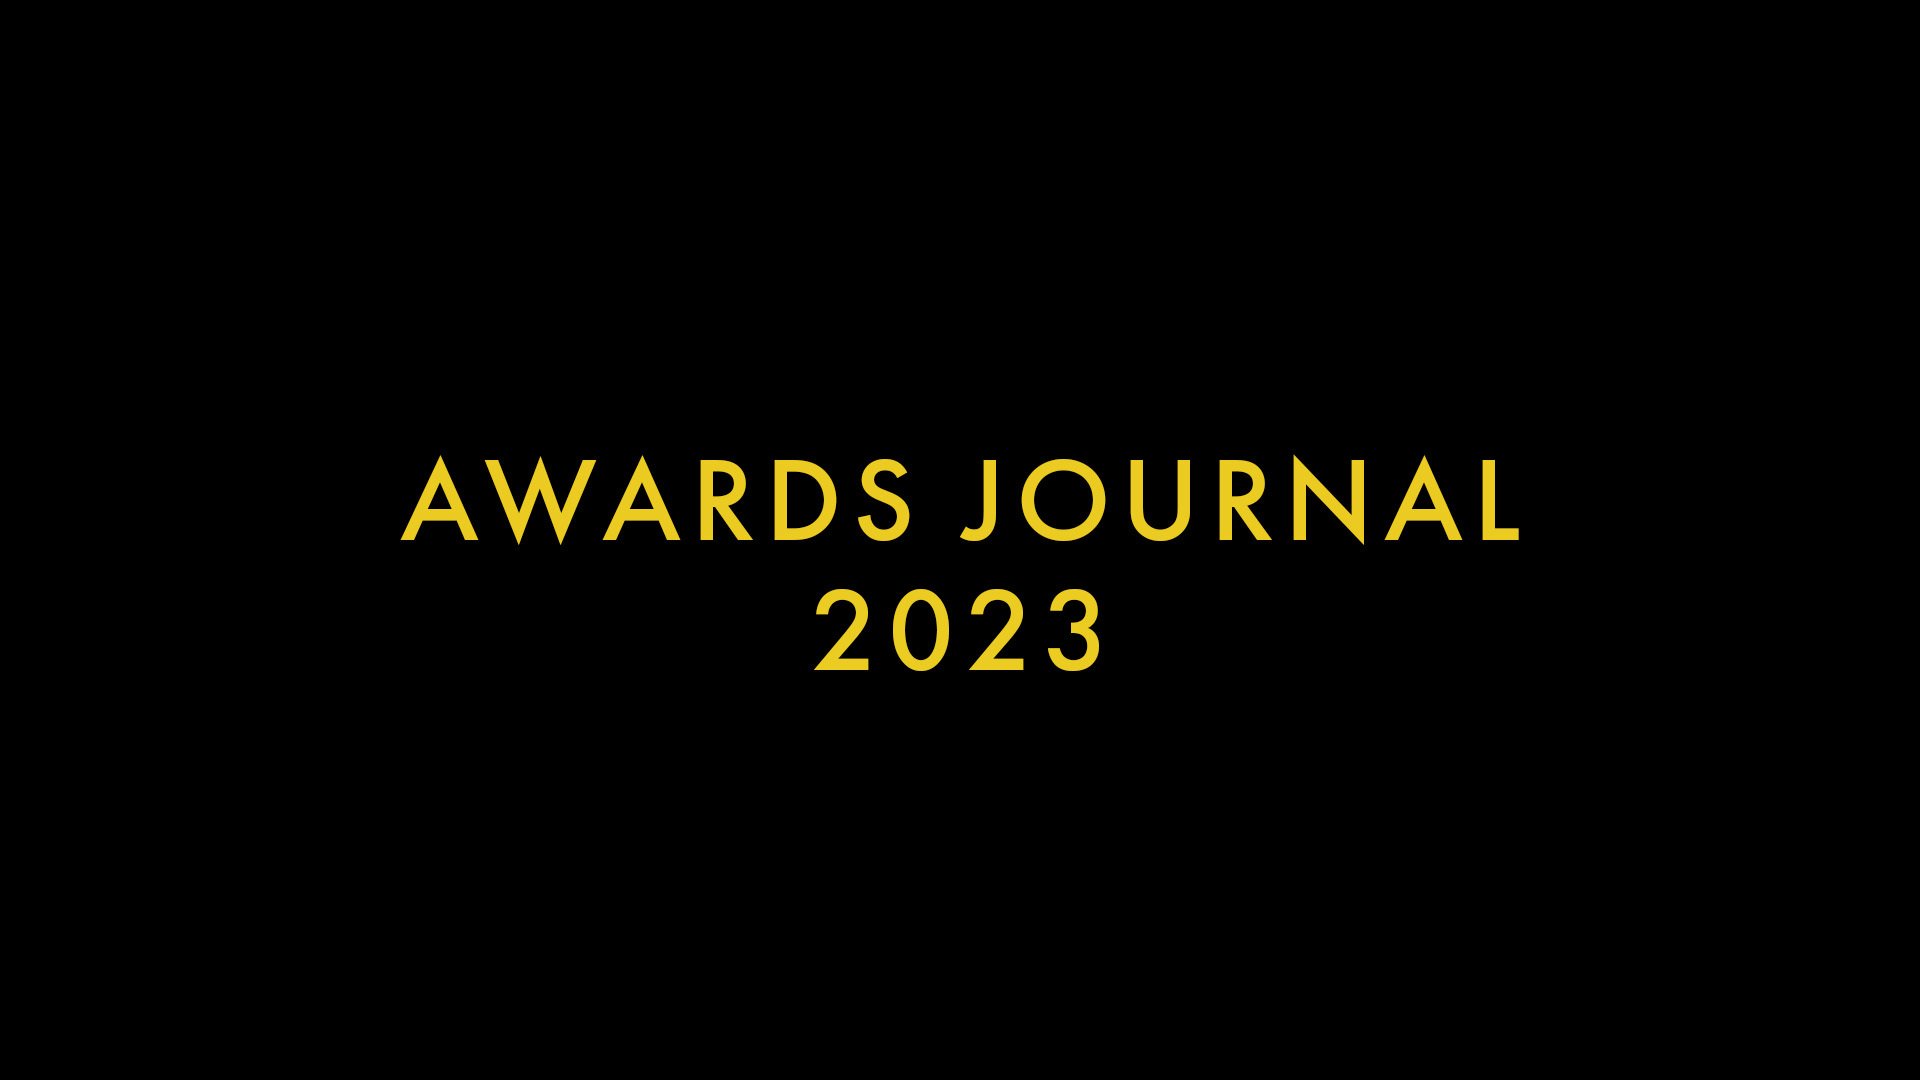 The 2023 Awards Journal is Here